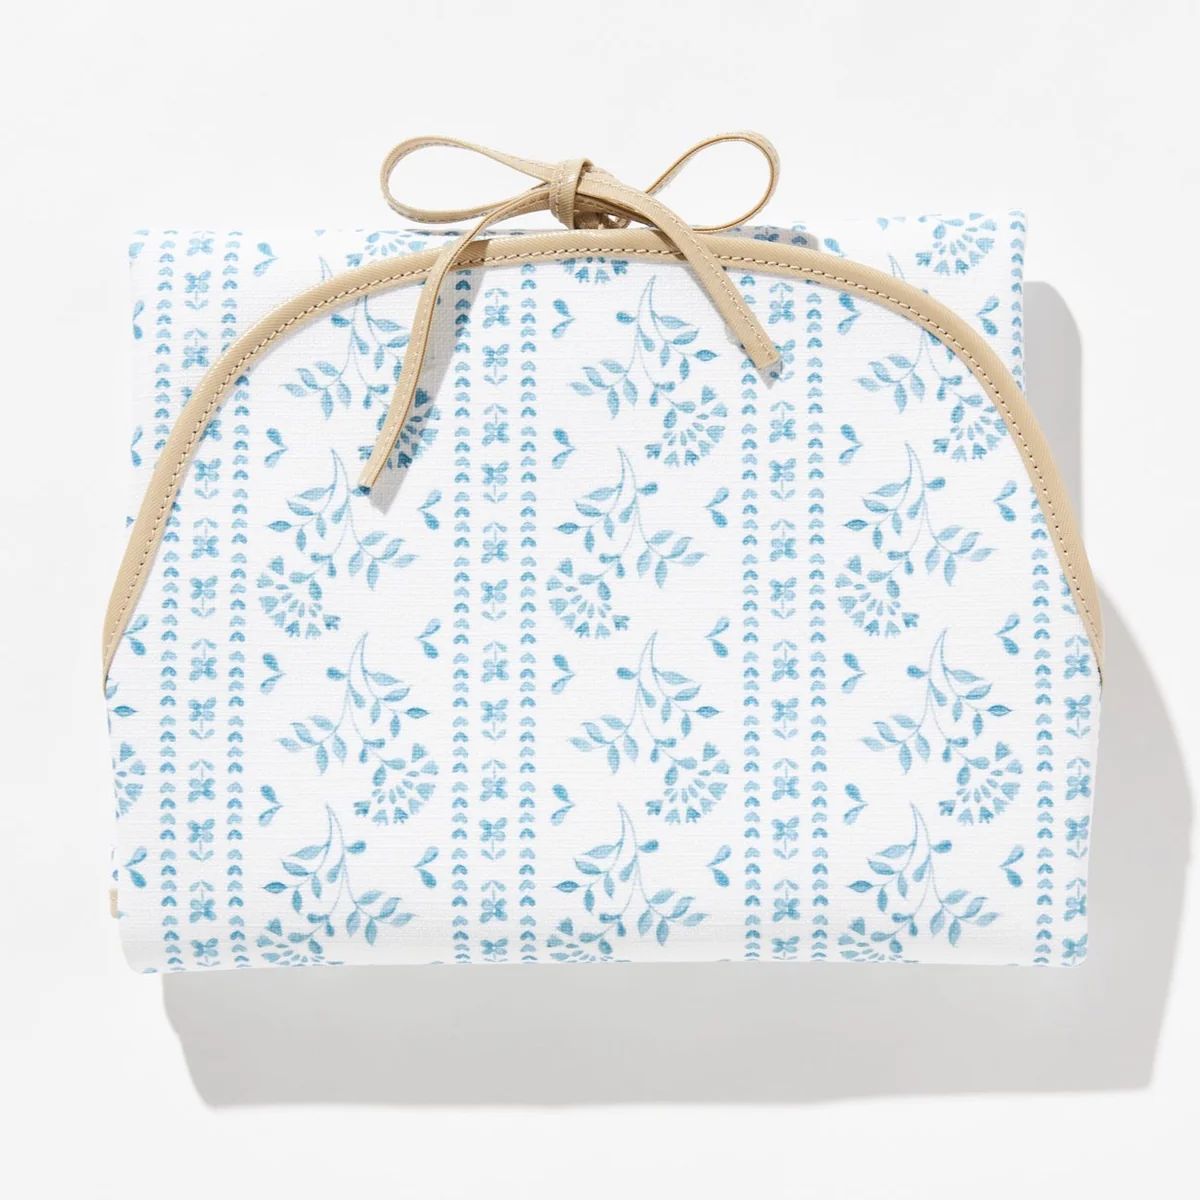 Changing Pad - Blue Floral Stripe | Dondolo